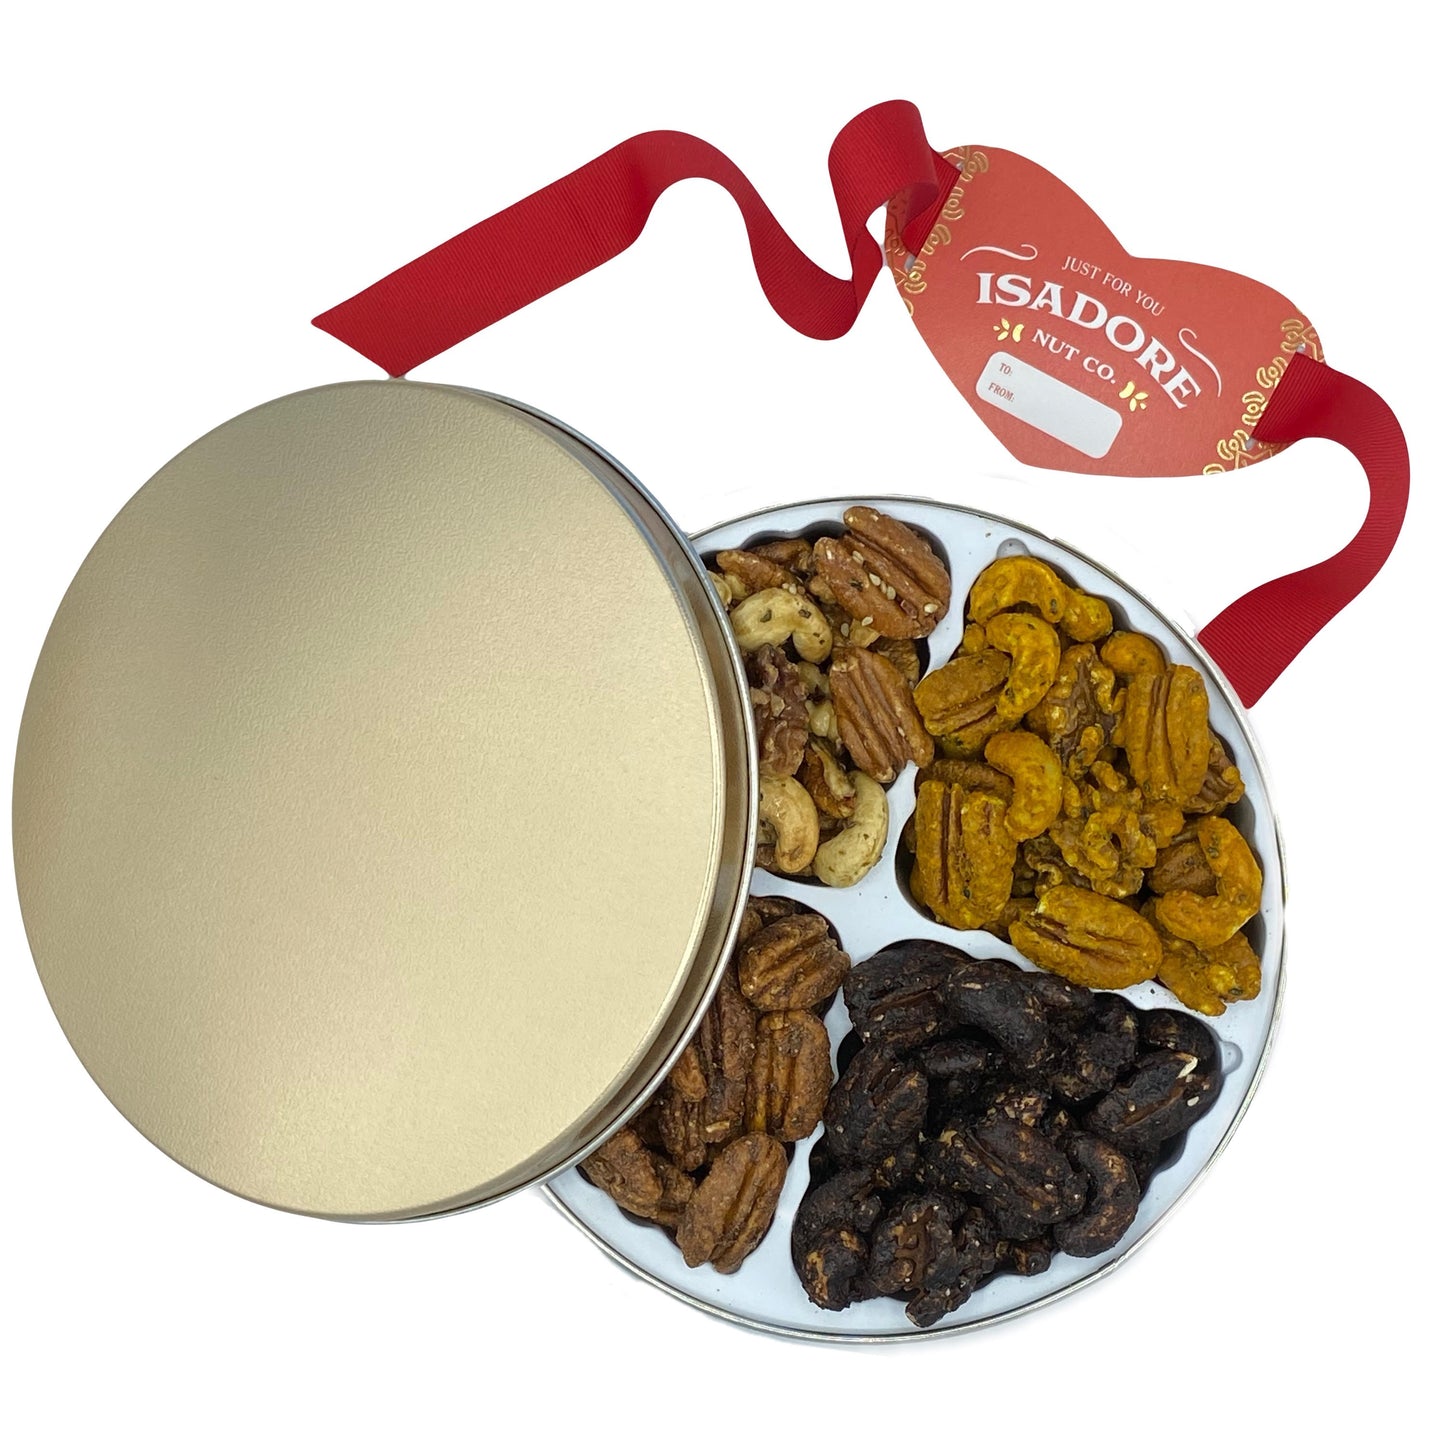 
                  
                    THE LOVING MIXED NUT GIFT TIN- A curated selection of our best-selling nut blends makes the perfect loving gesture in a keepsake gold tin. Personalize our attractive Isadore Nut Co. red heart 'to-from' card elegantly wrapped with a classic red ribbon.
                  
                